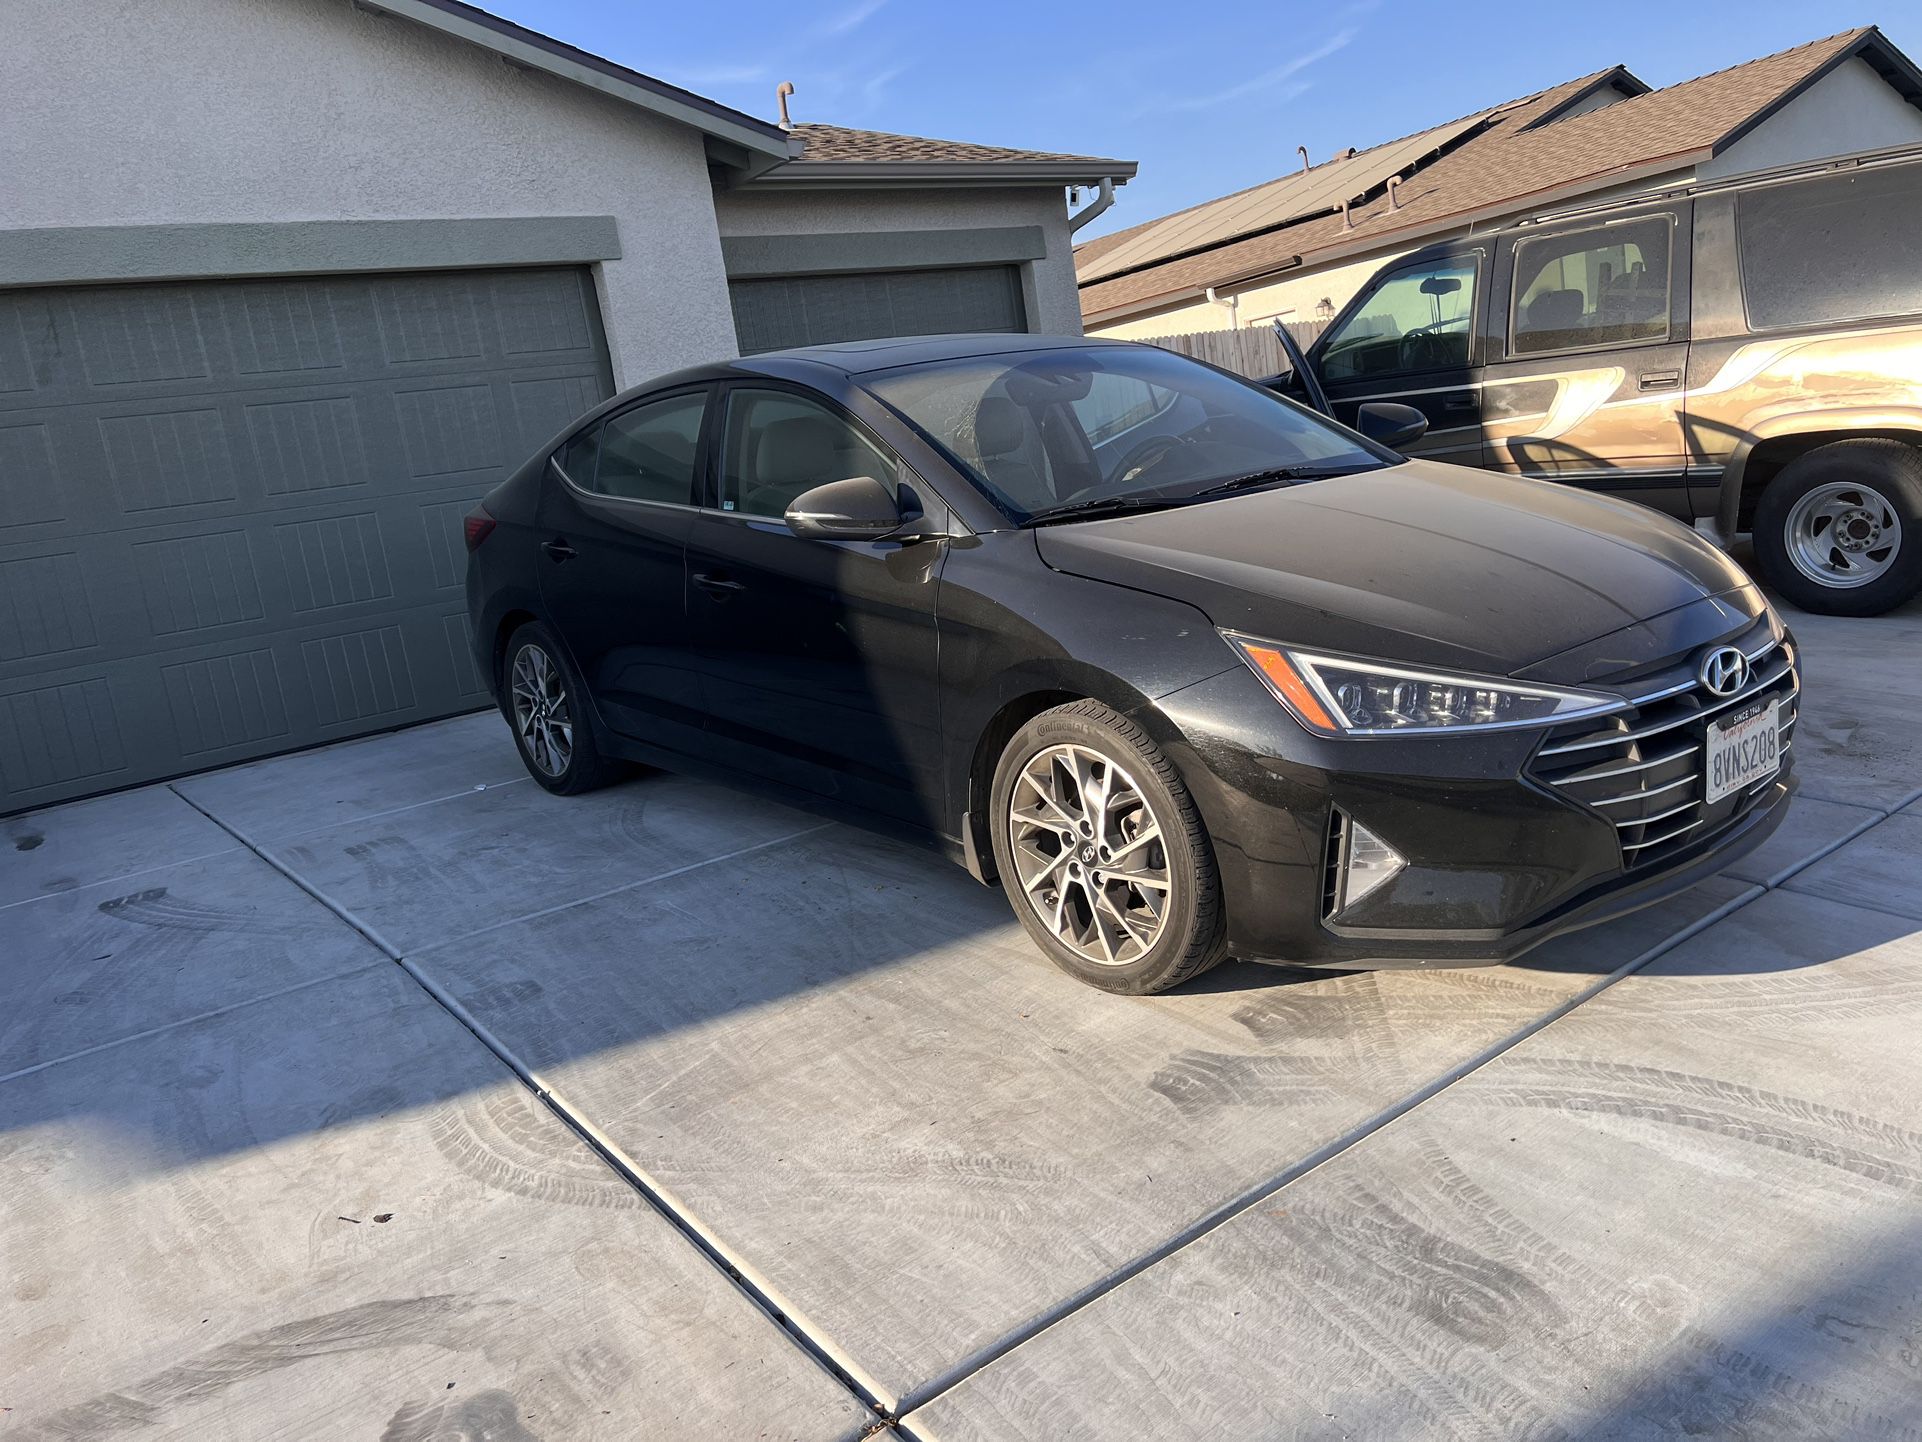 Cars And Trucks for Sale in Visalia, CA - OfferUp